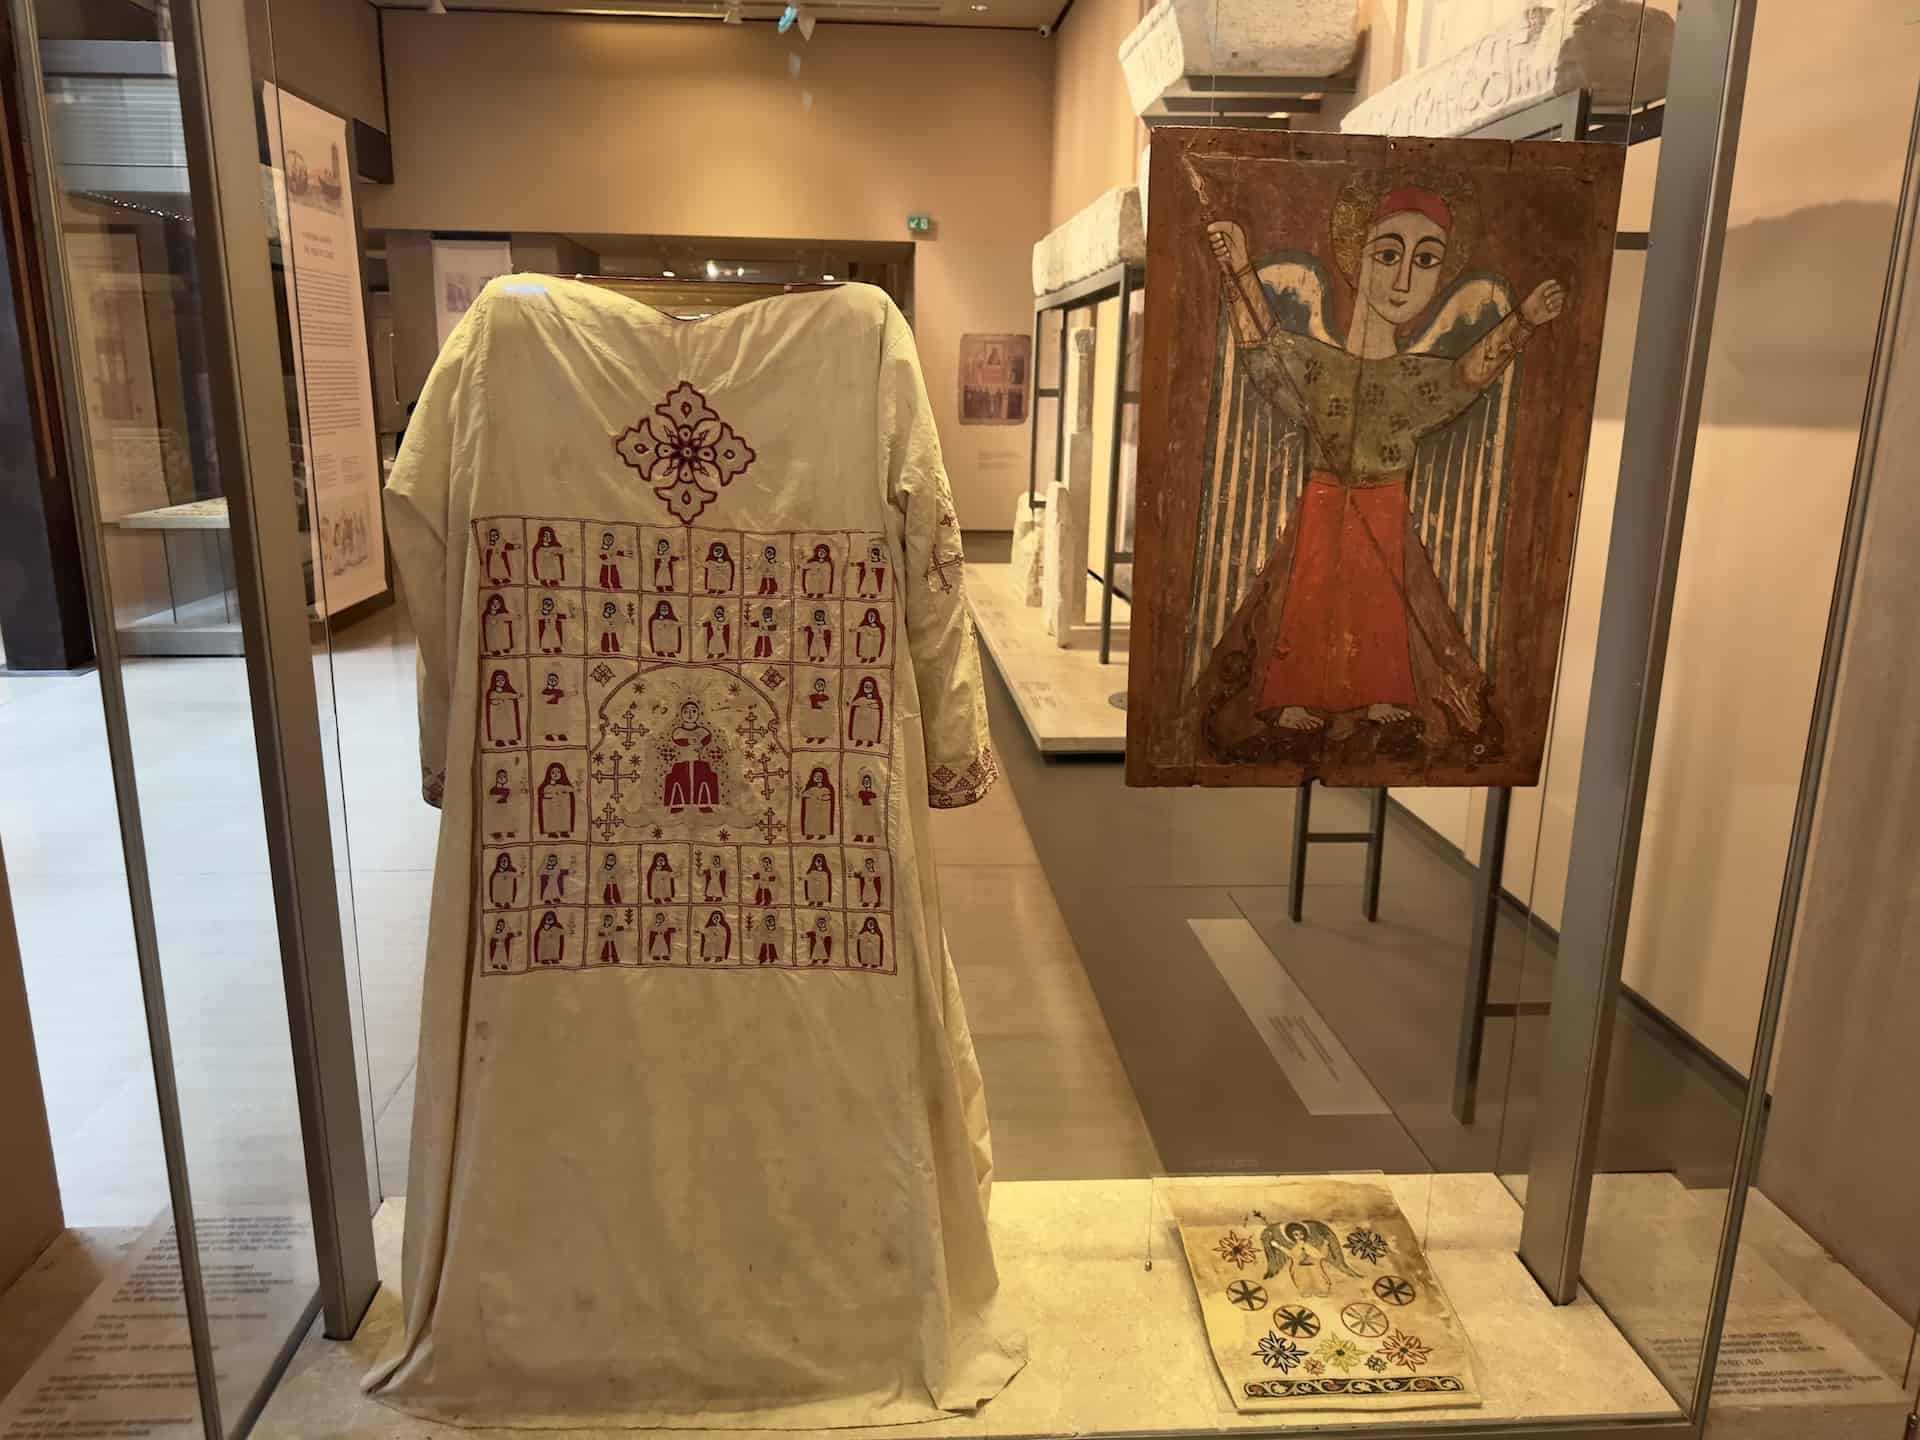 Cotton liturgical vestment (sticharion) with representation of a female saint (Damiana?) flanked by 40 female saints, embroidered with silk thread, 18th-19th century (left); Coptic icon with an archangel, 17th century (top right); part of a silk vestment embroidered with silk and metallic threads, 15th-19th century (bottom right) at the Byzantine Museum in Athens, Greece